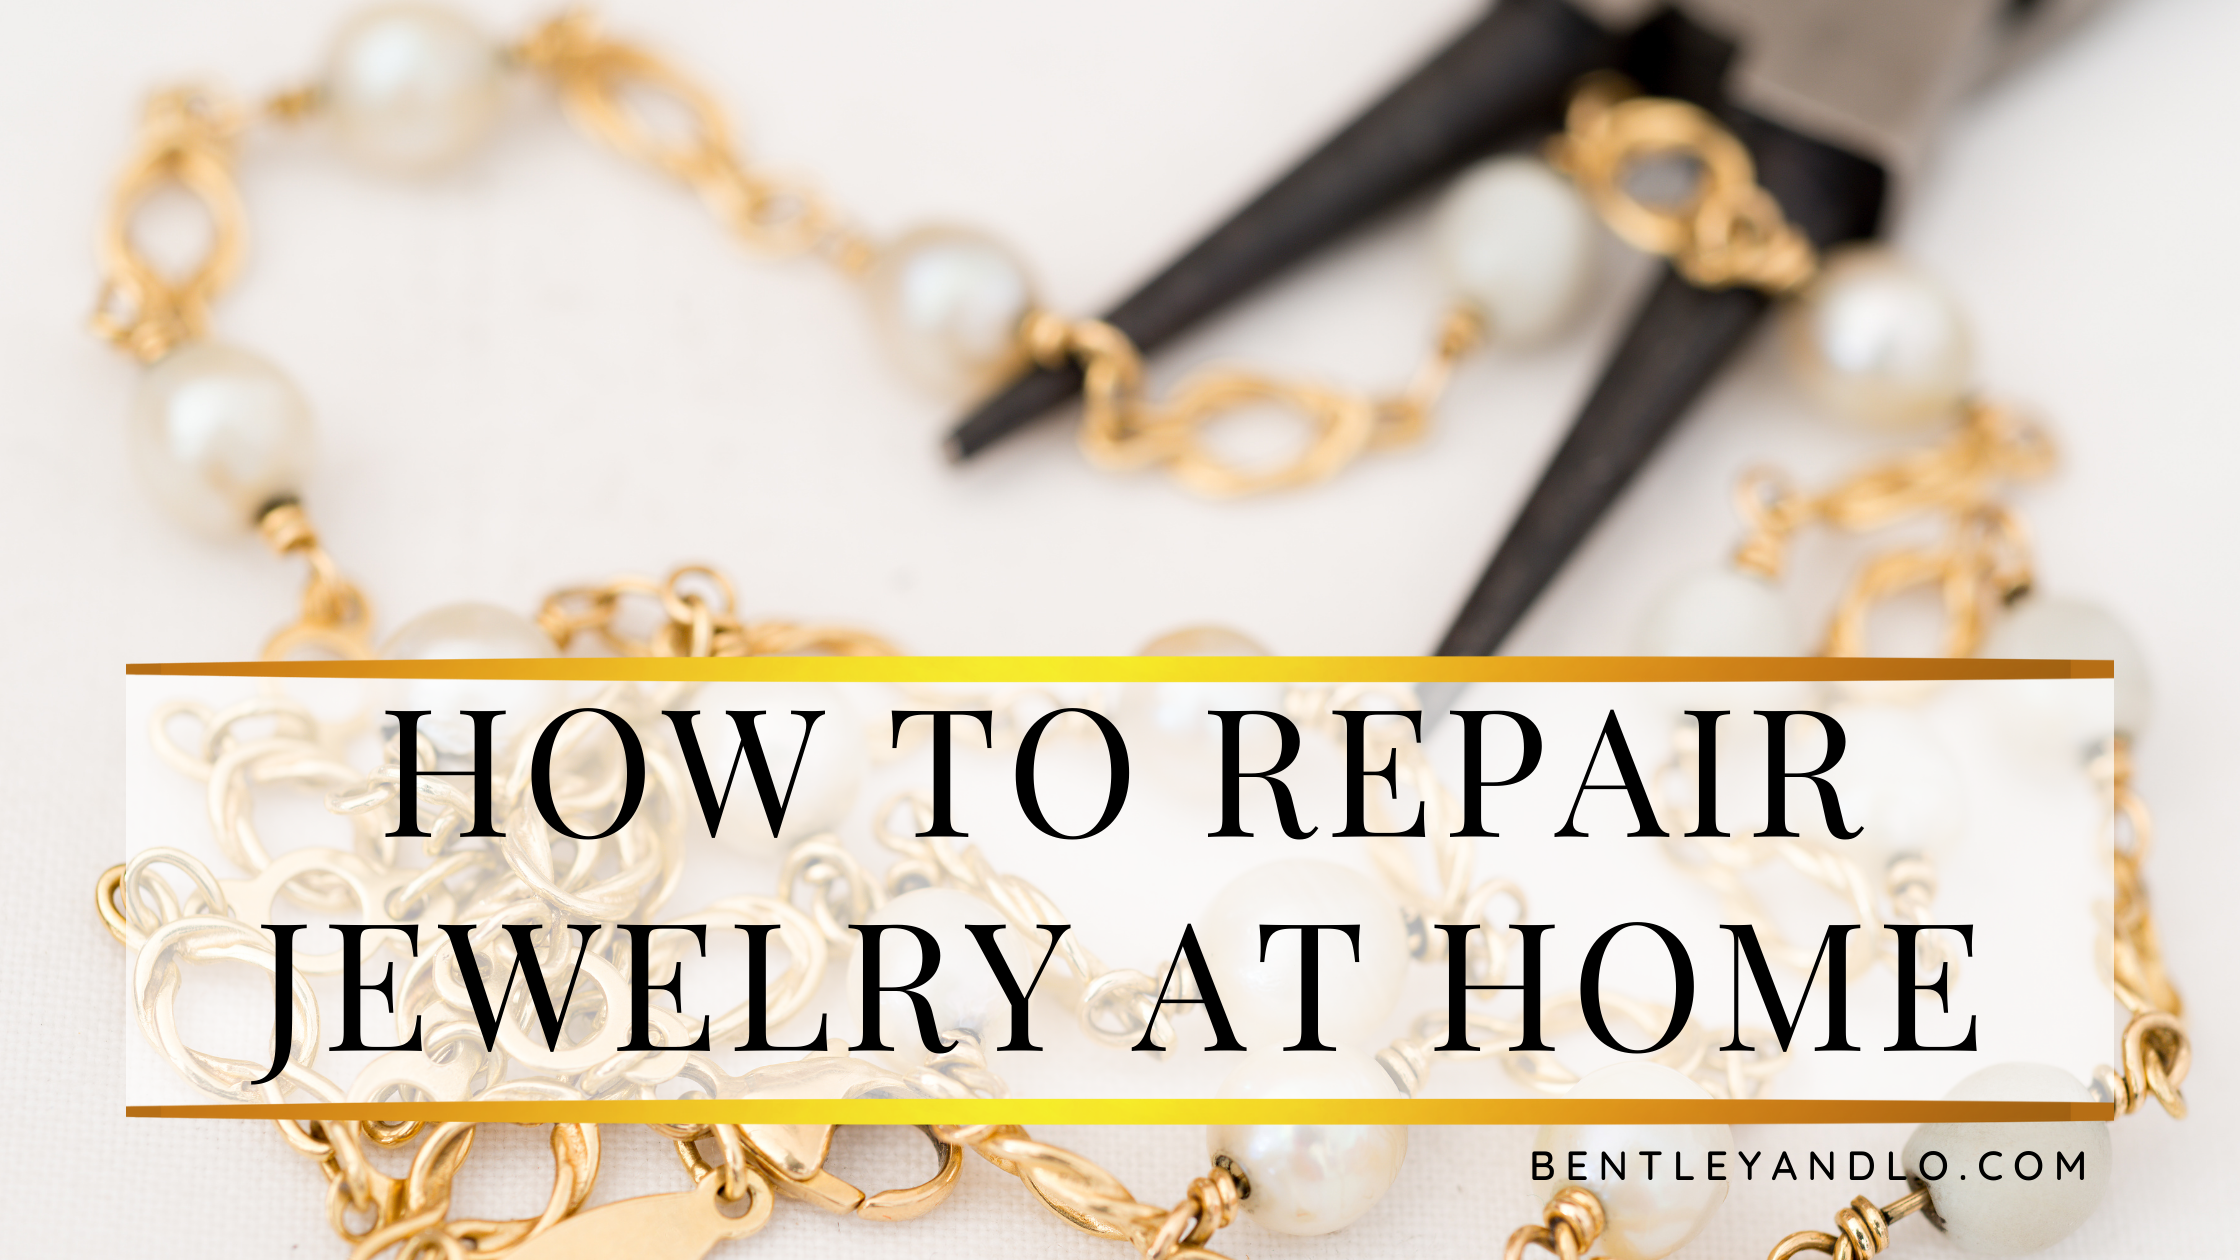 7 Jewelry Repairs You Can Make Yourself